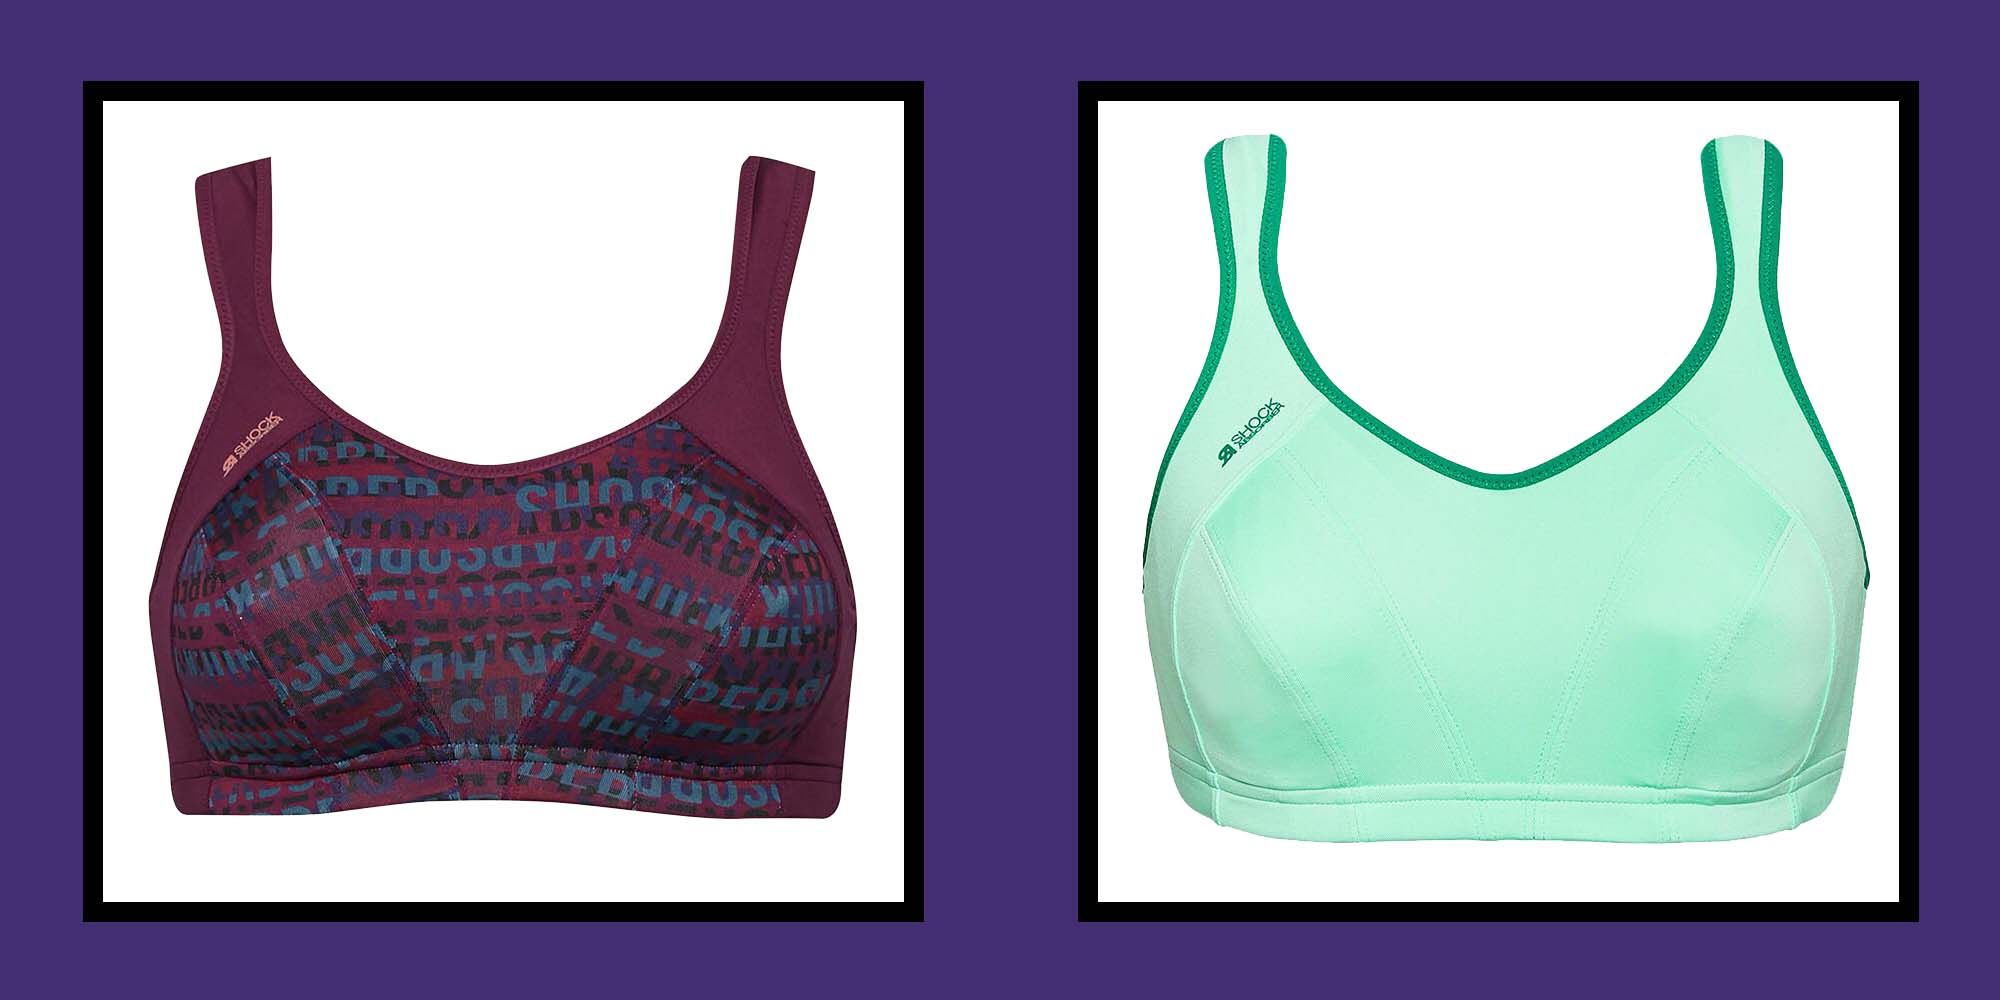 Research finds running in the wrong sized sports bra shortens your stride